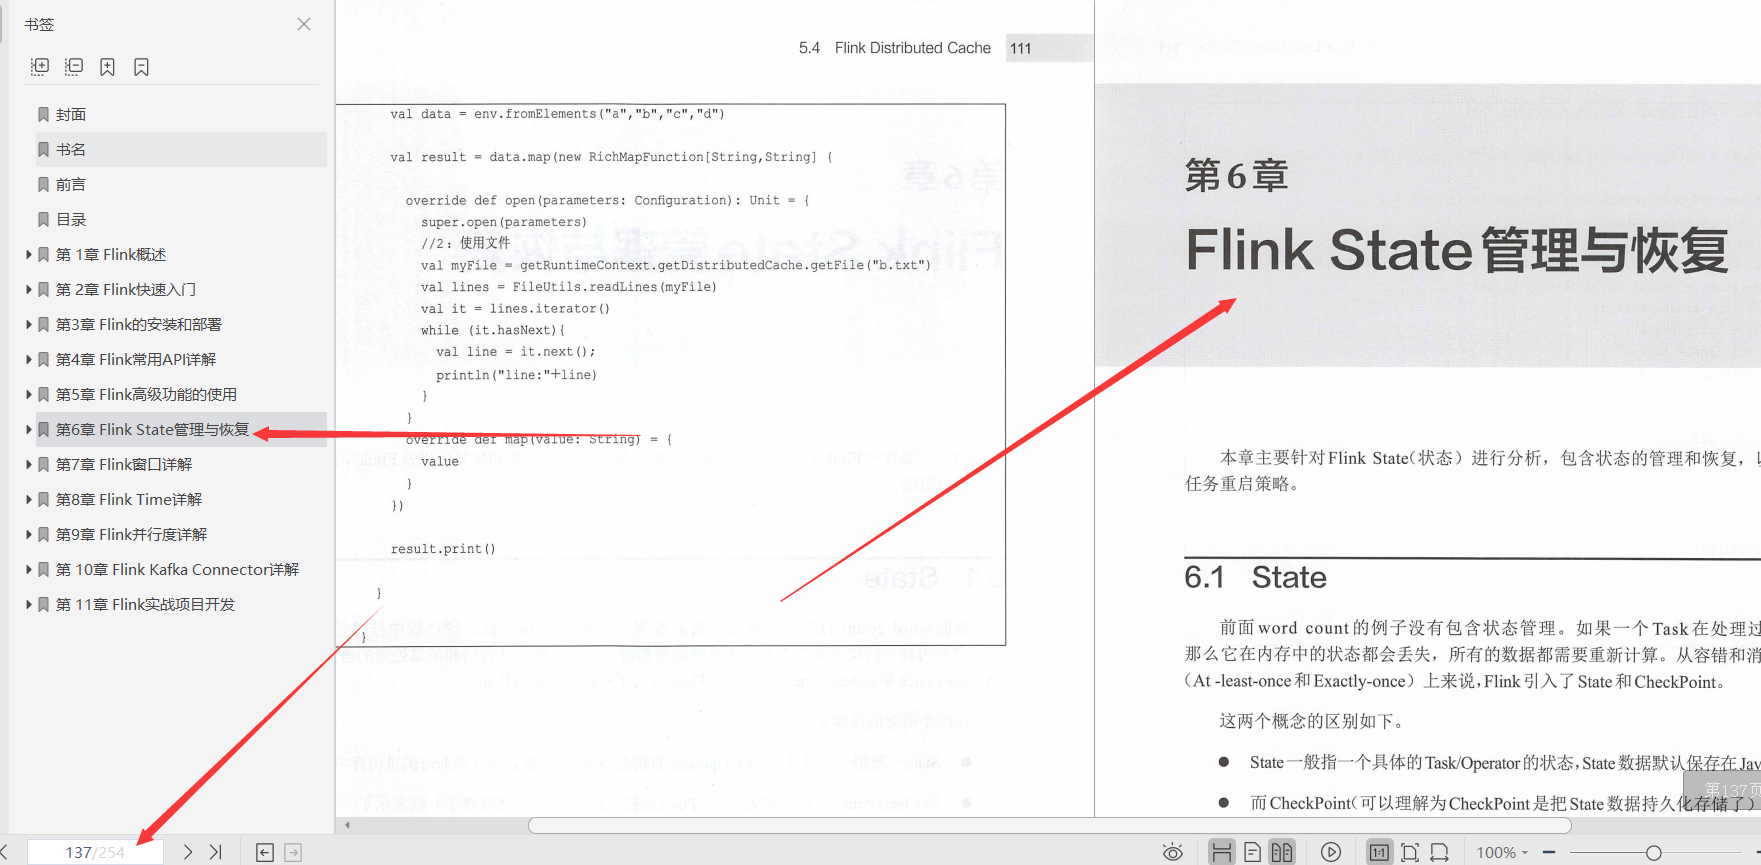 Finally finished learning the Flink introduction and actual combat PDF recommended by Alibaba Cloud big data architect